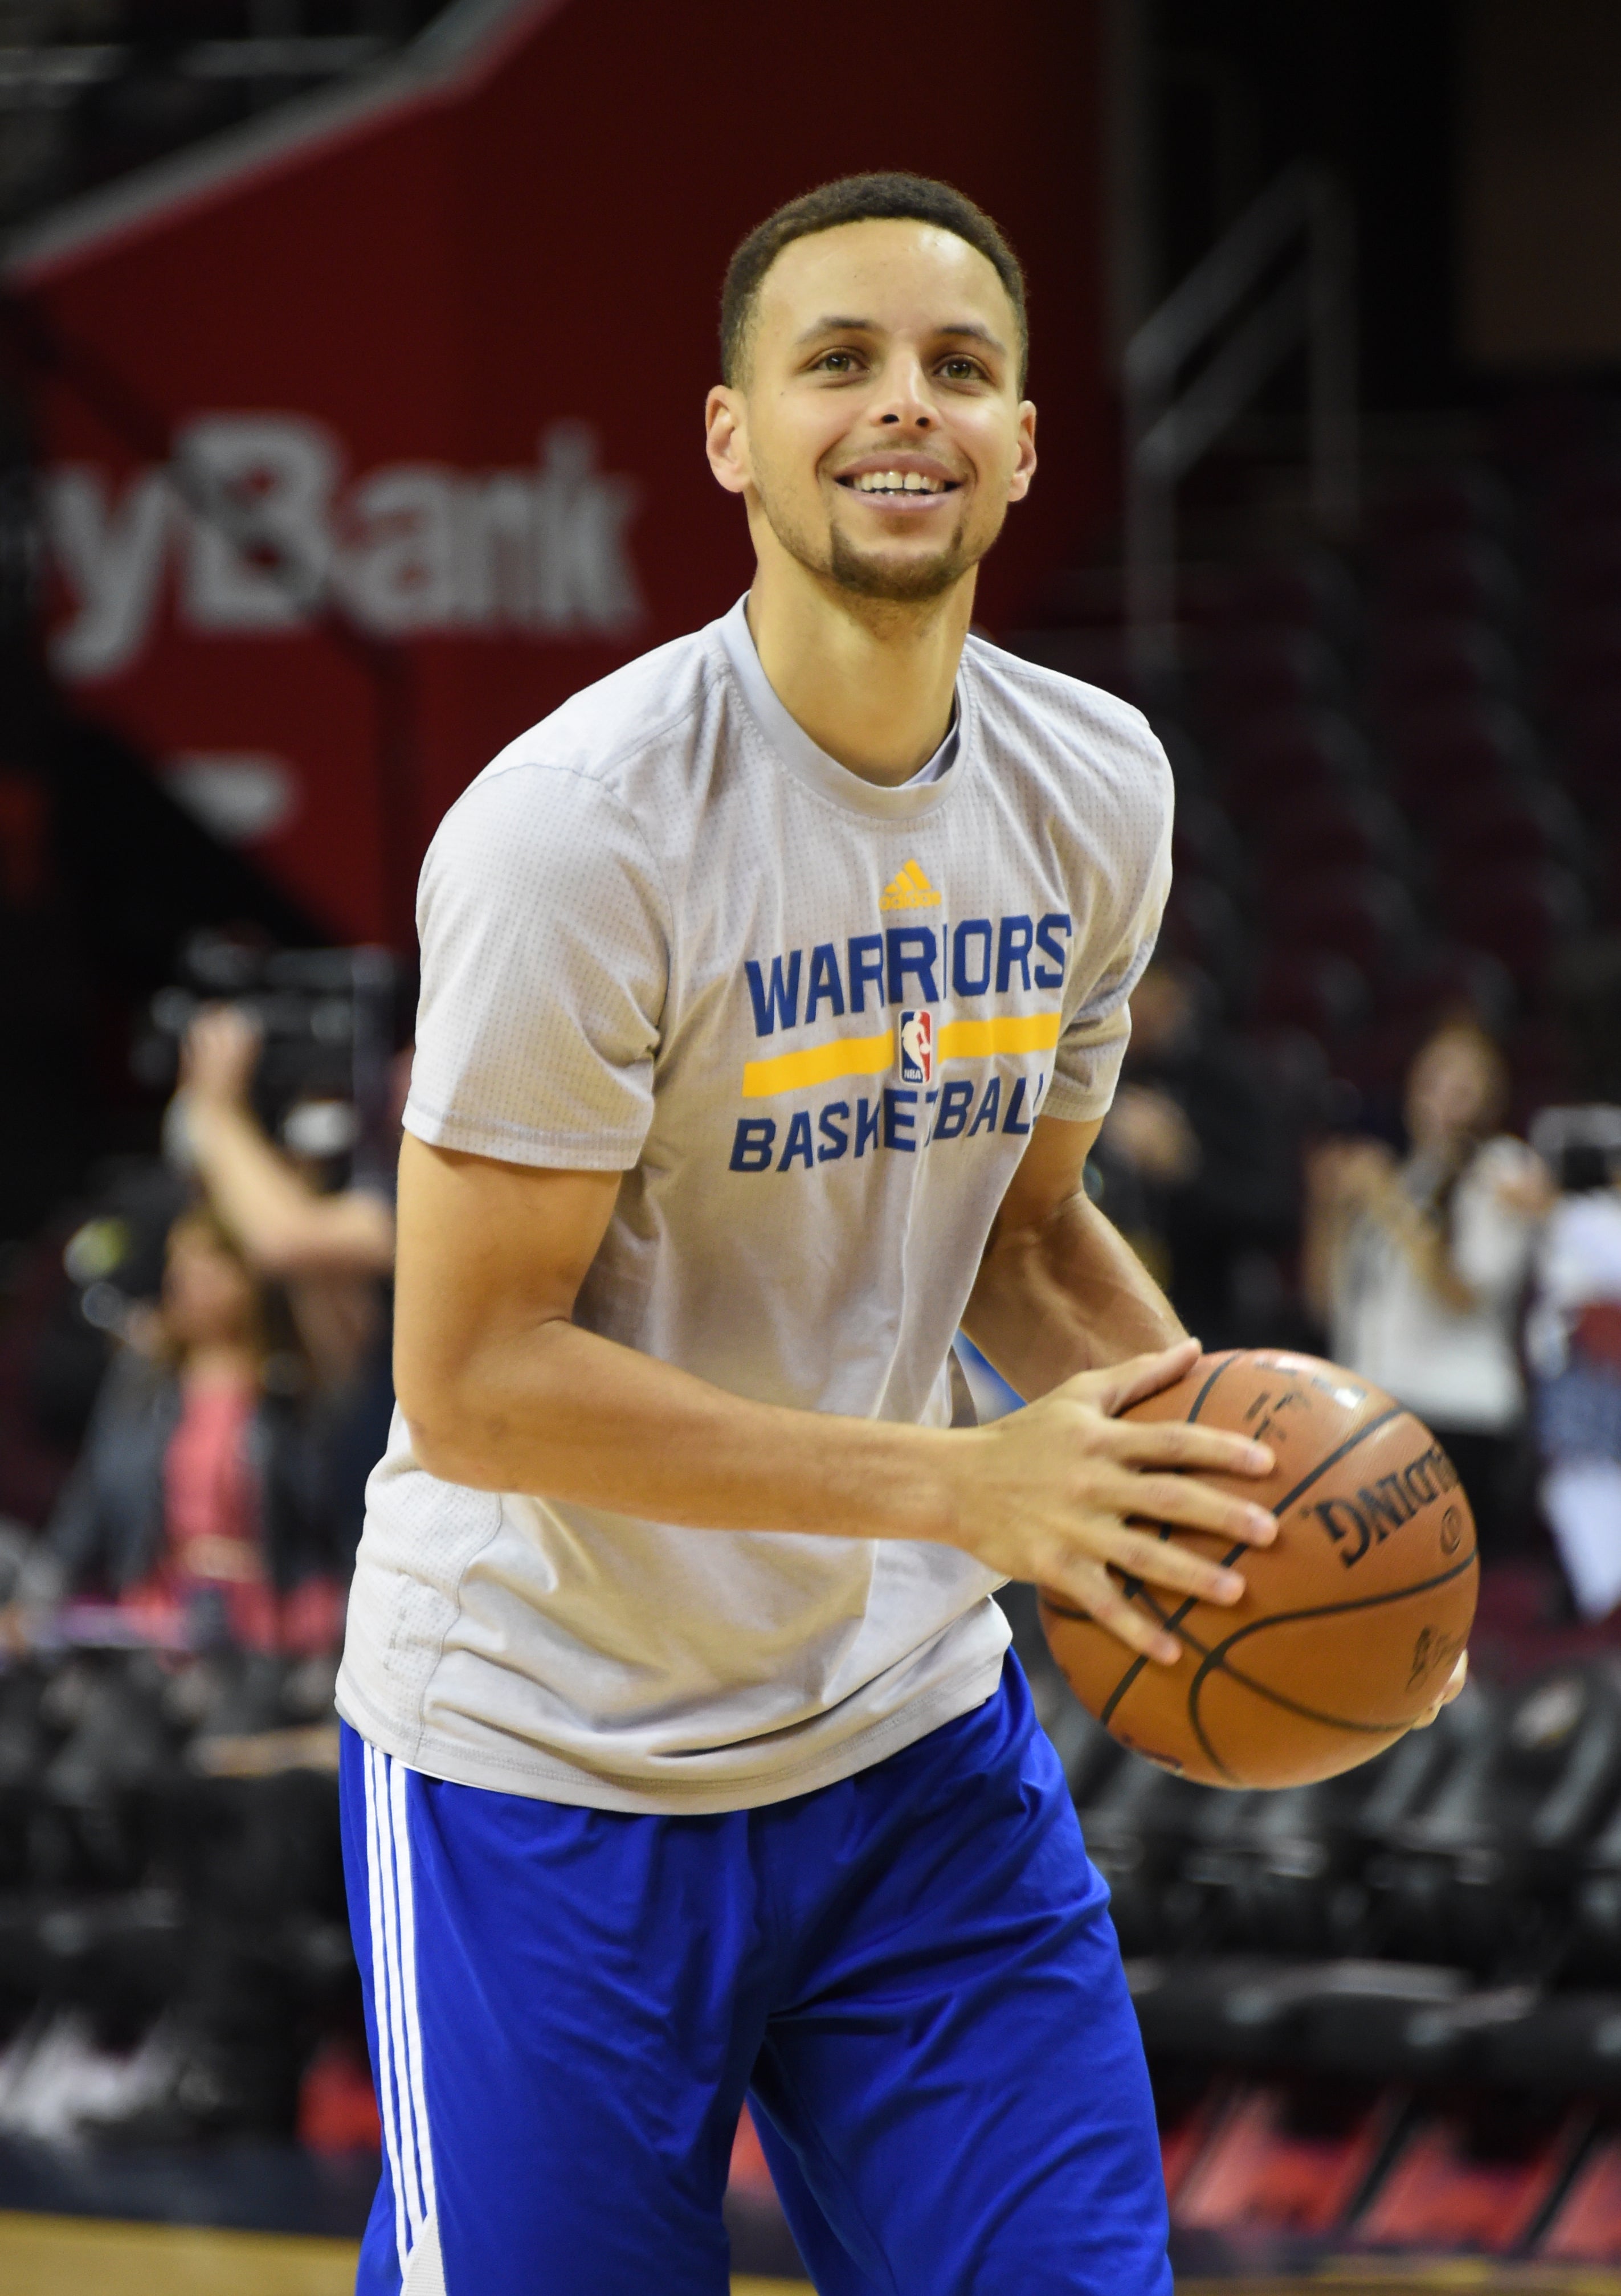 Steph Curry Surprises Young Basketball Campers, See Their Priceless Reactions
